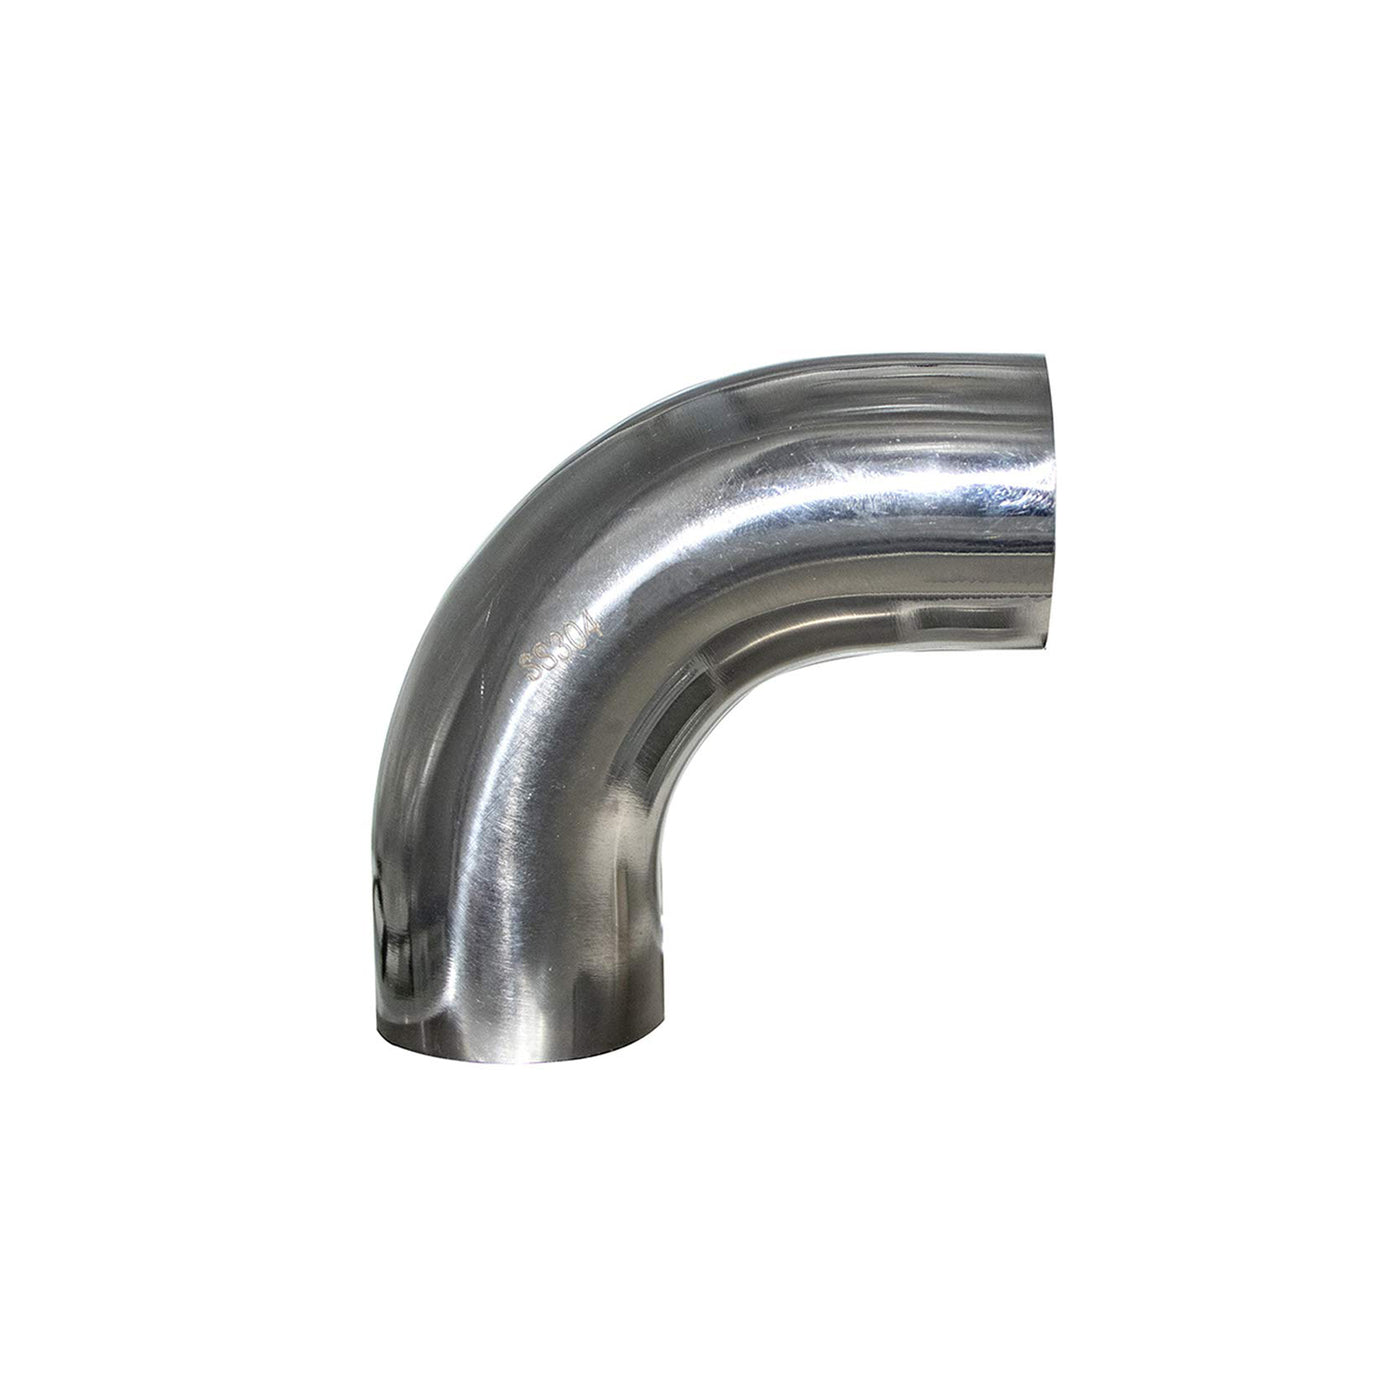 SS304 Bend 90 degree JLD-646  32 x 1.2mm